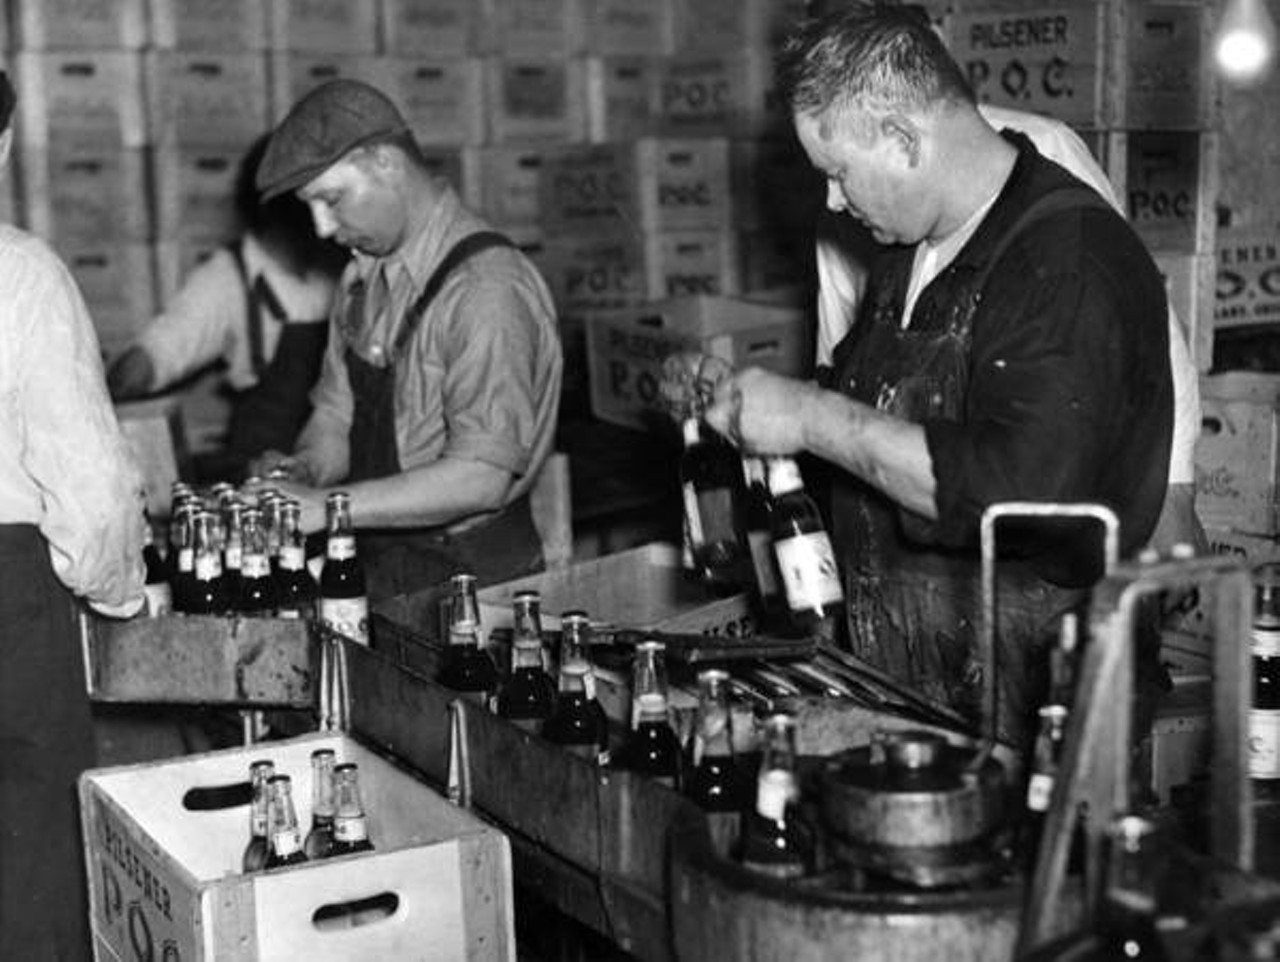  Packing Cases of P.O.C. Beer, Pilsener Brewing Company, West 65th and Clark, 1933 